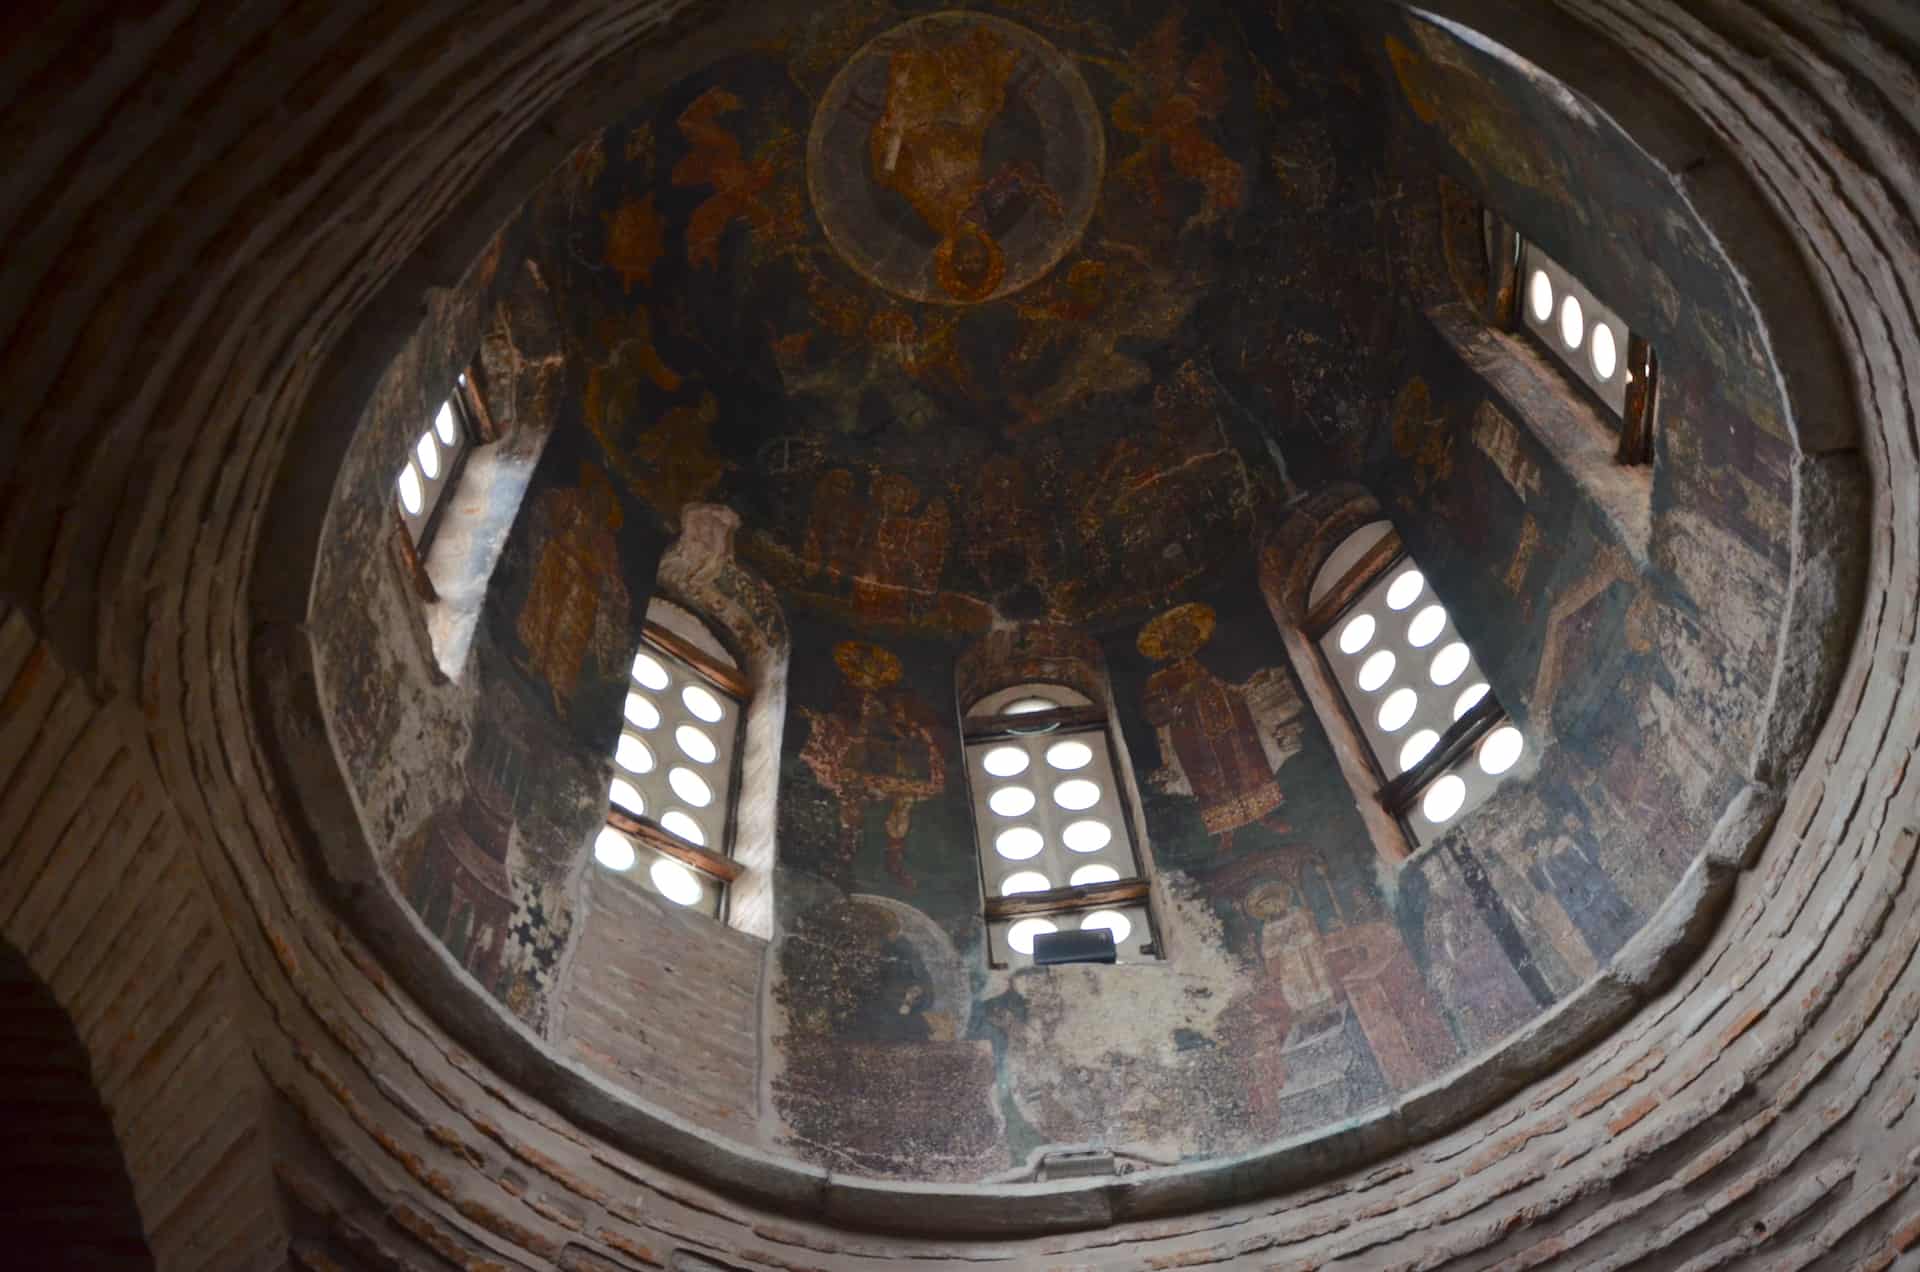 Dome of the Transfiguration Chapel in Thessaloniki, Greece